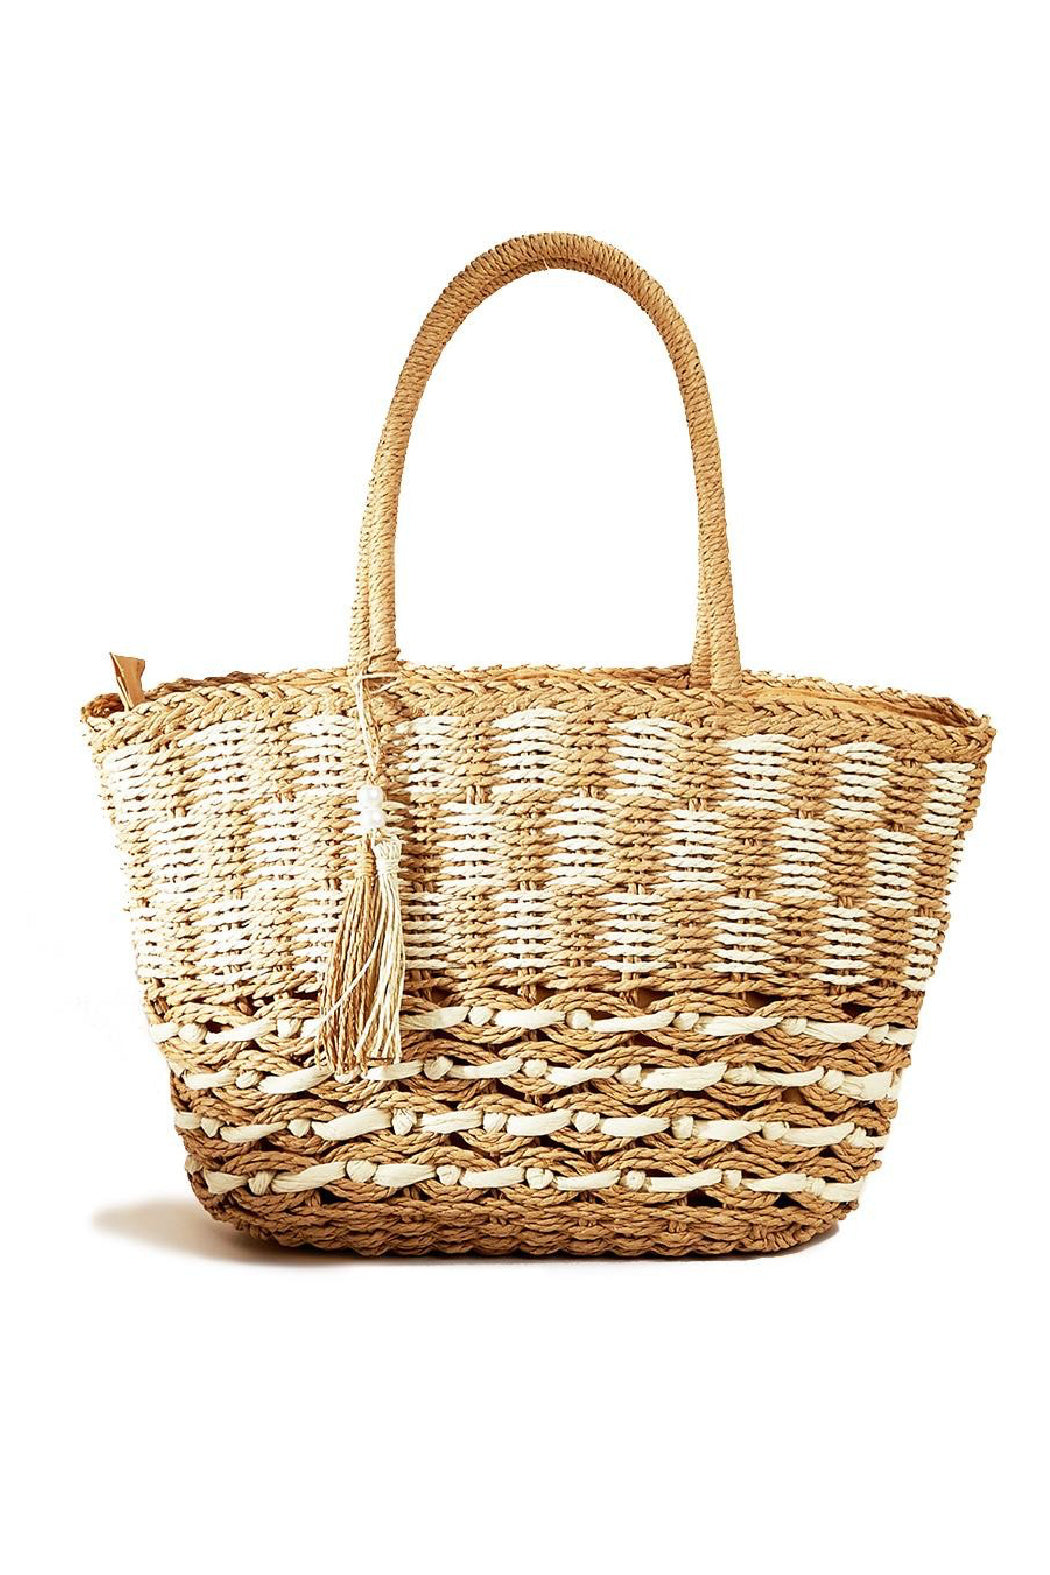 Checkered Pattern and Braided Straw Bag